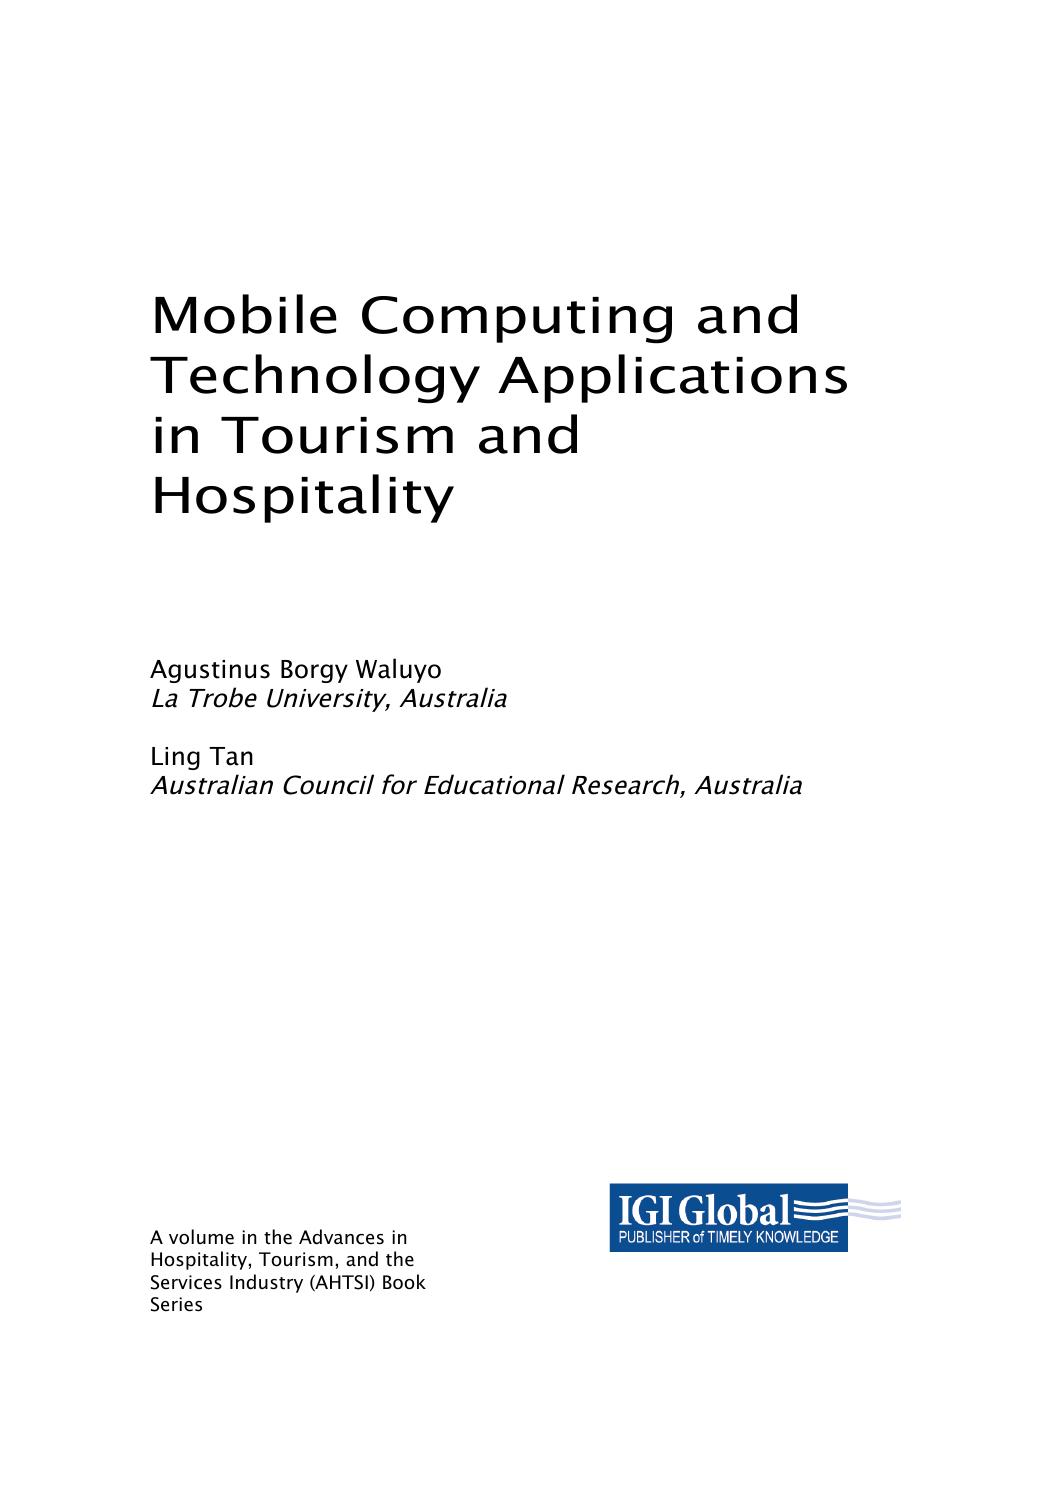 (Advances in Hospitality, Tourism, and the Services Industry) Agustinus Borgy Waluyo (editor), Ling Tan (editor) 2022